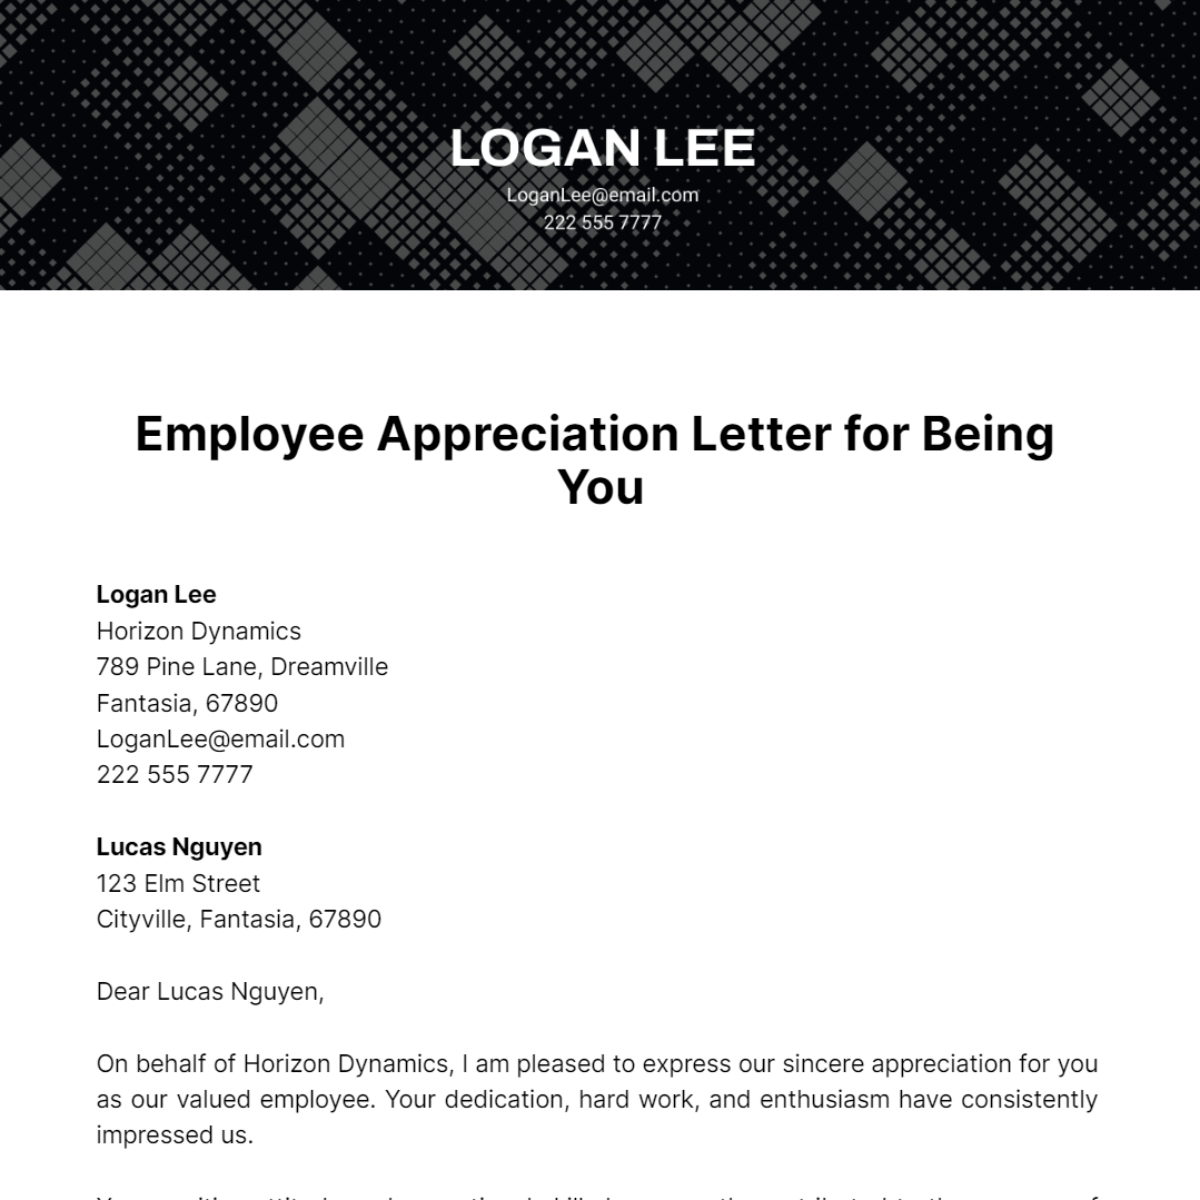 Employee Appreciation Letter For Being You Template